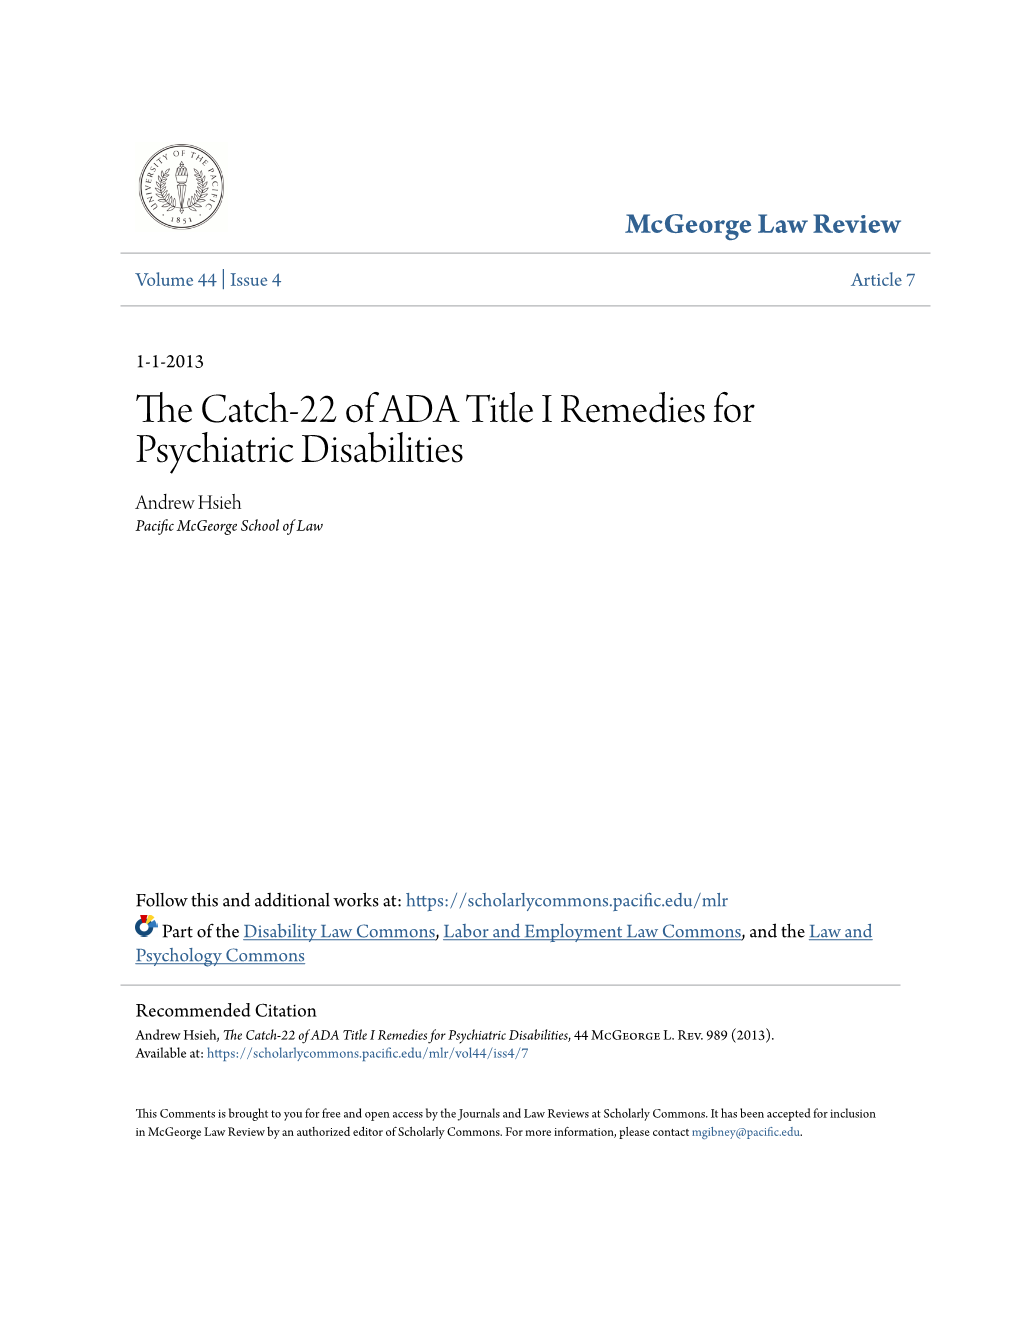 The Catch-22 of ADA Title I Remedies for Psychiatric Disabilities, 44 Mcgeorge L